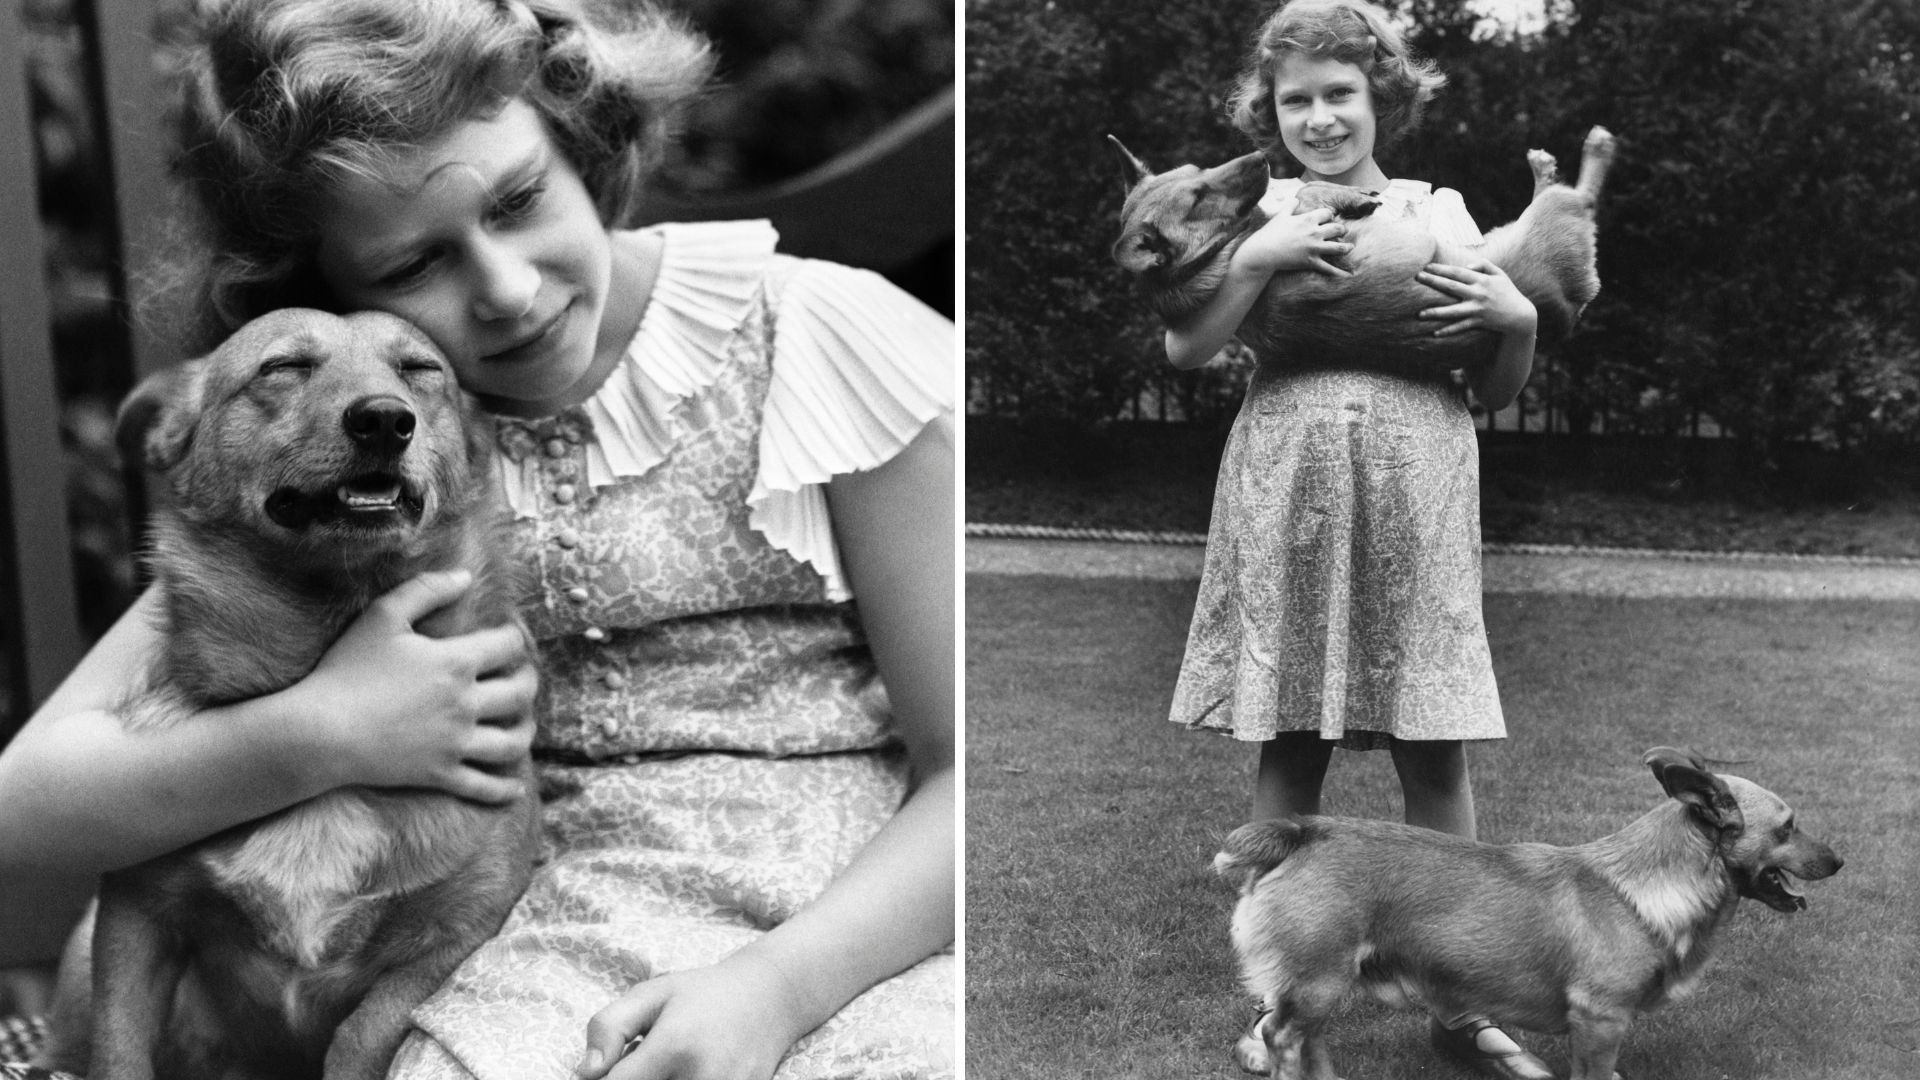 <p>                     The late Queen's corgis were an iconic and symbiotic part of her historic 70-year reign. She made the dog breed synonymous with palaces and royalty, and it turns out, her bond to the breed was a lifelong one.                   </p>                                      <p>                     In heart-warming snaps of a young Princess who would have no idea she'd go on to become Britain's longest-serving monarch in history, a young Elizabeth is caught playfully scooping up her dogs and giving one an affectionate hug.                   </p>                                      <p>                     These photos are dated 1936, meaning the young Princess would only have been about 10 years old.                   </p>